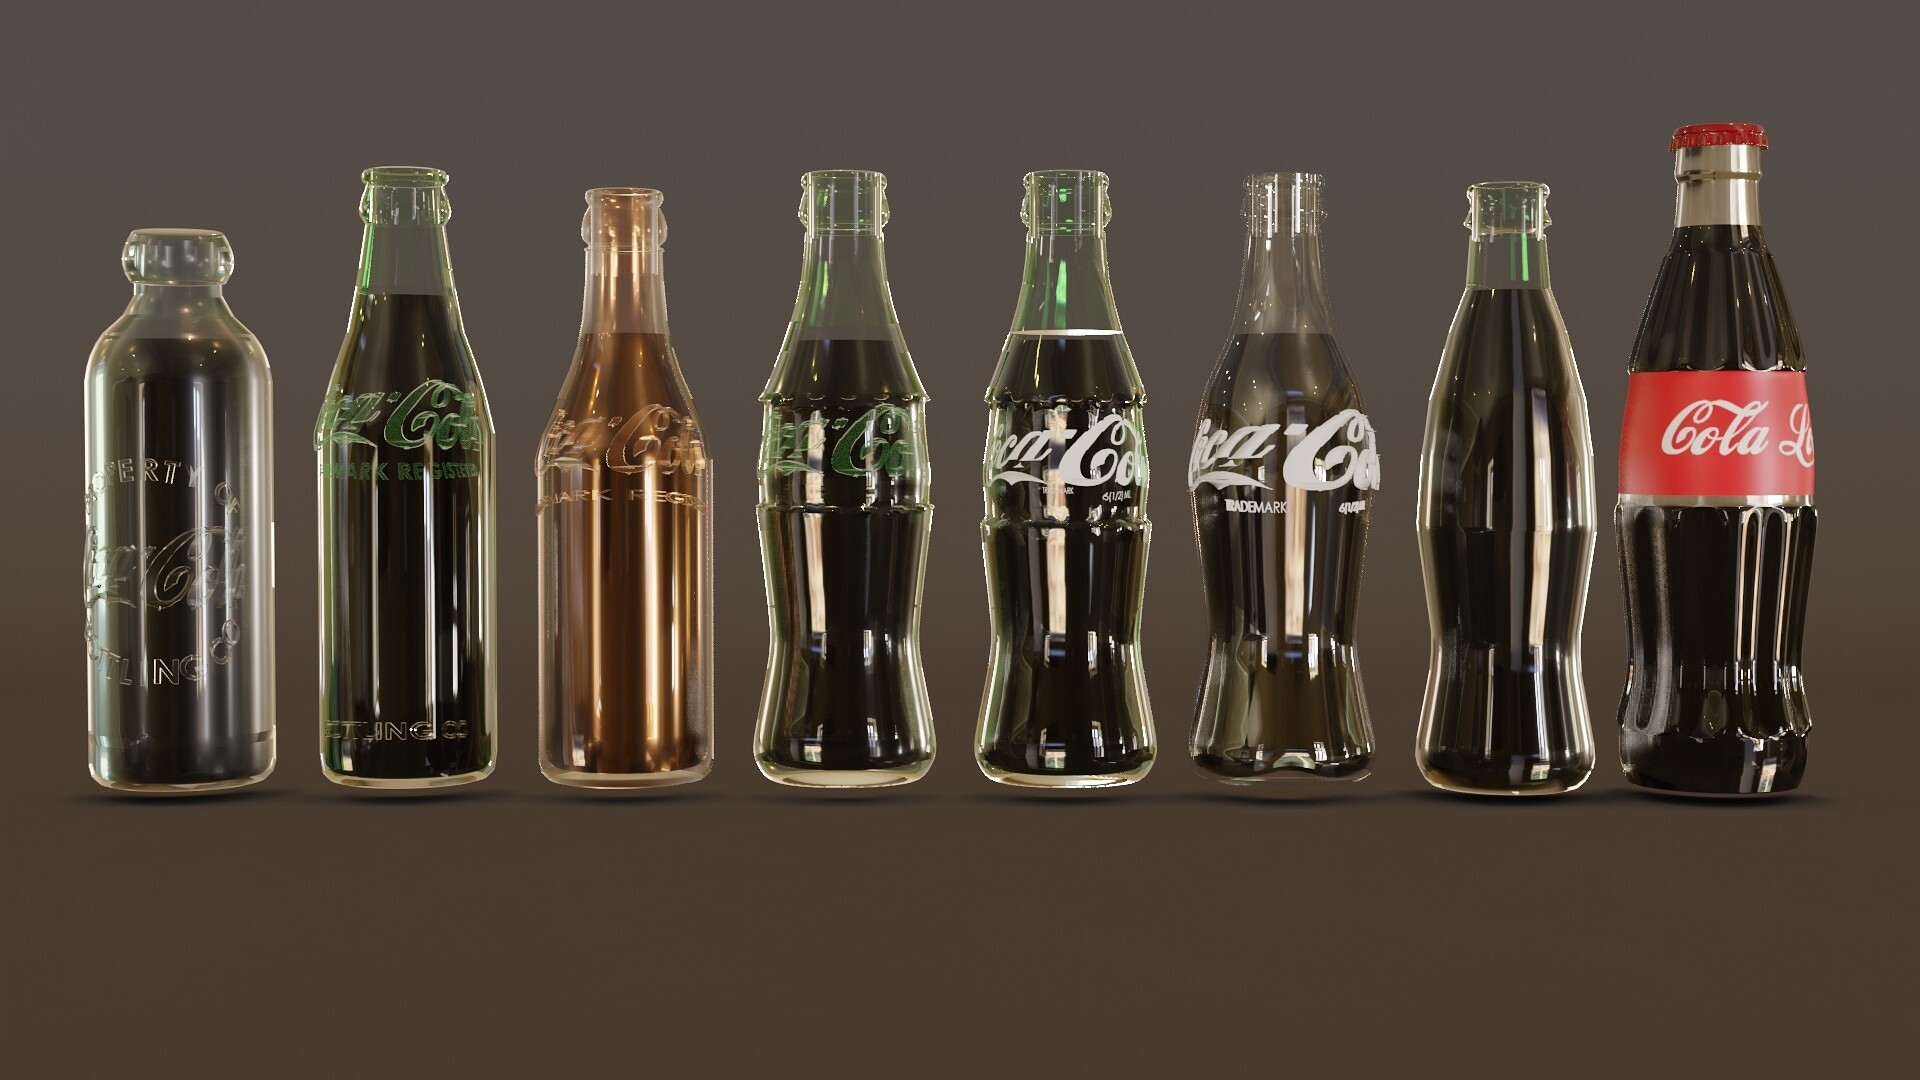 ArtStation - Coca-Cola over the years modelled by me